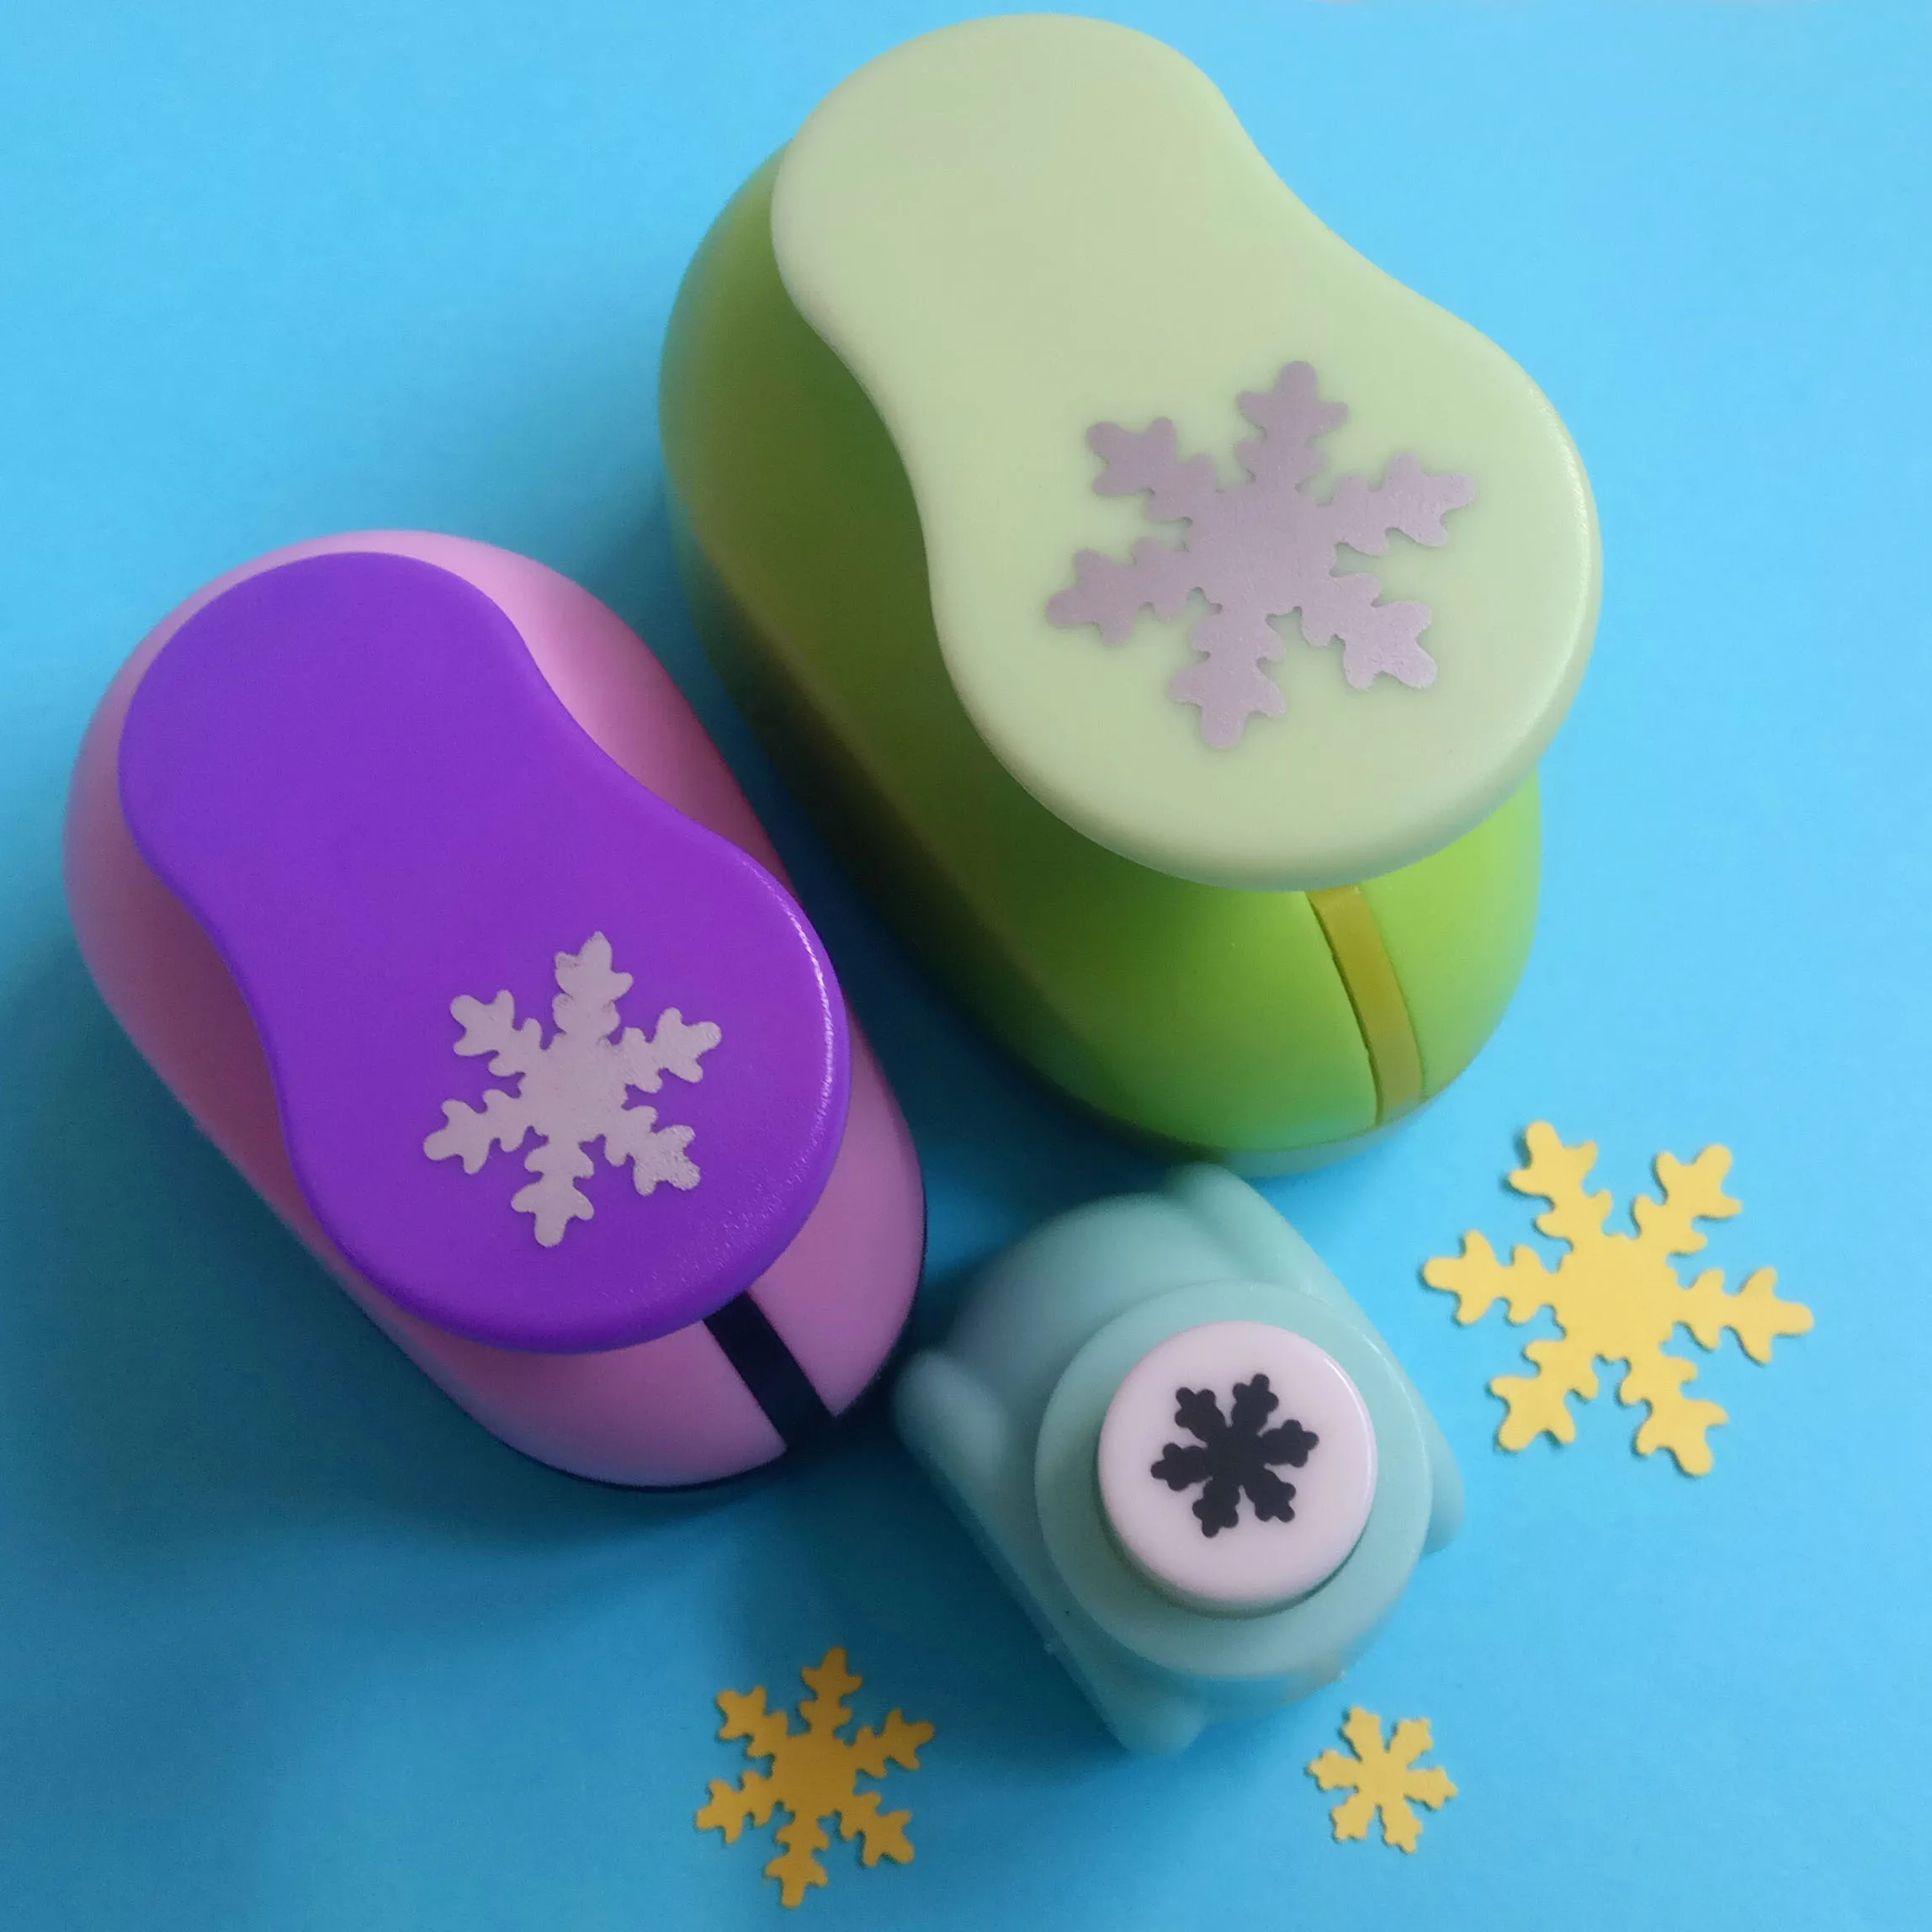 Worldoor Set of 3pcs Snowflake (5/8 inch+1 inch+1.5 inch) Craft Punch Set Snowflake Paper Punch Punch Craft Scrapbooking Eva Punches